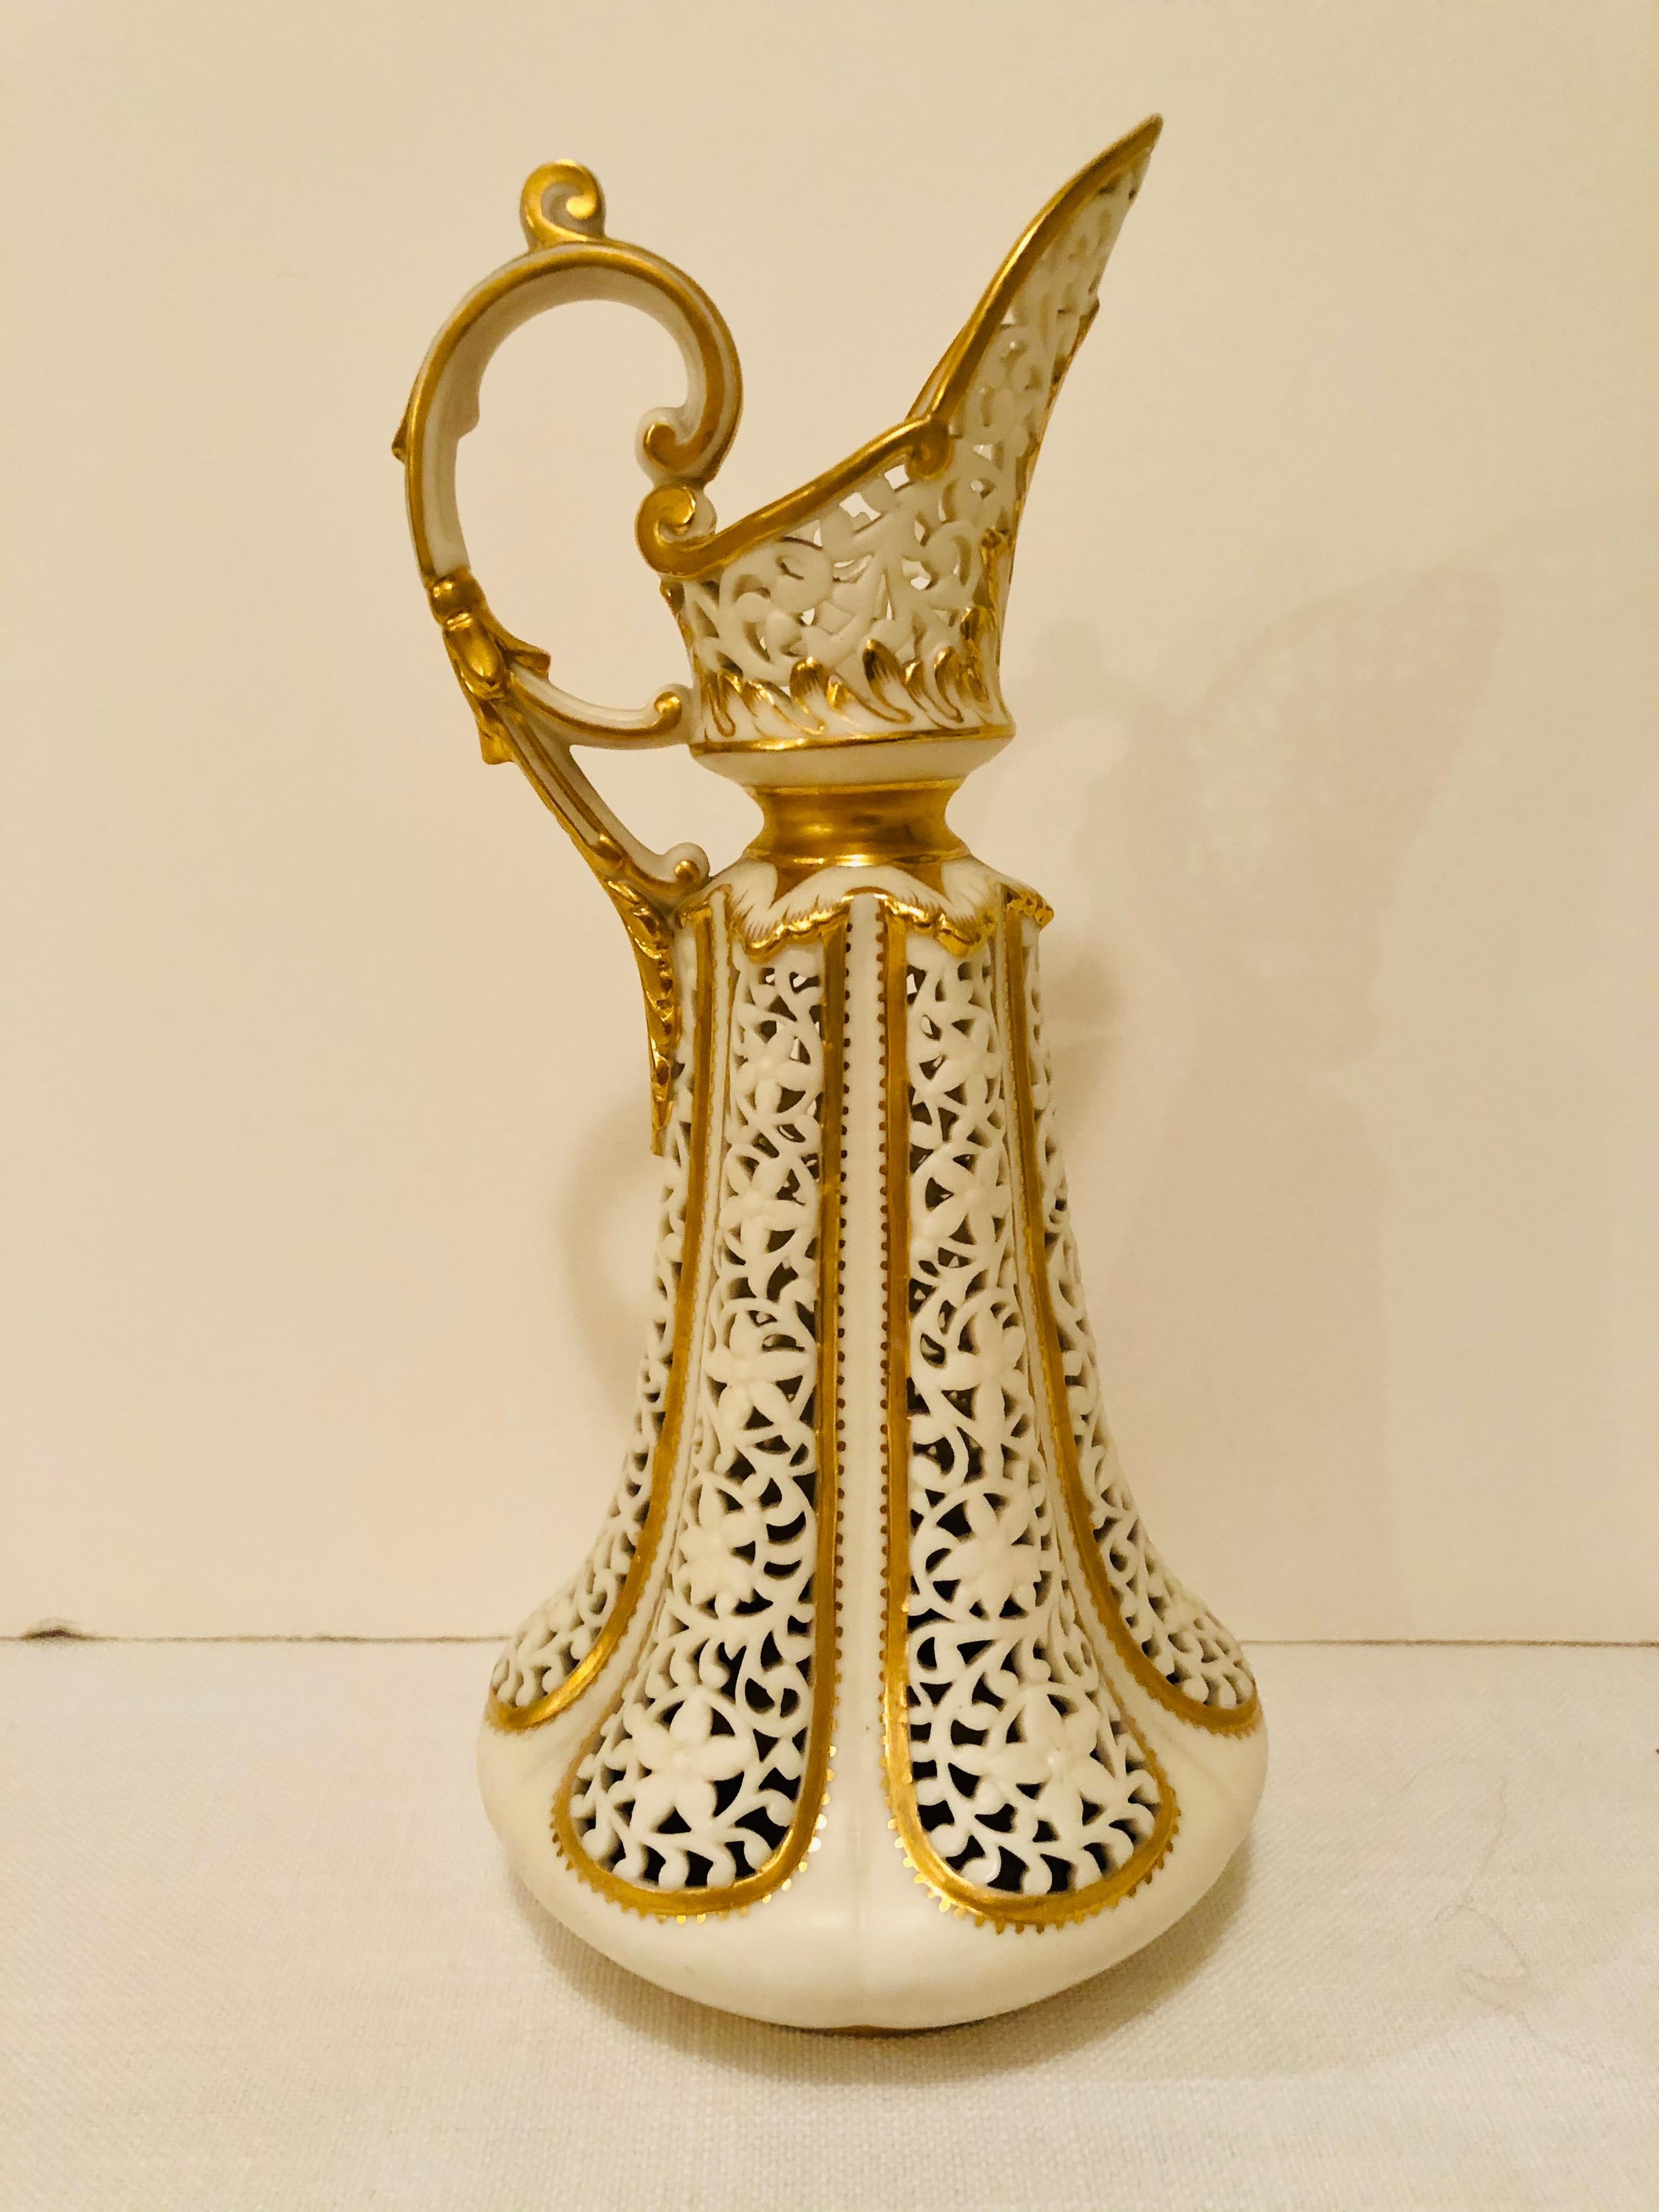 Look at the exquisite intricate openwork on this Grainger and Company Worcester vase or ewer. The reticulation on this vase is masterfully executed by an expert. This vase would be a wonderful addition to any English porcelain collection. It would